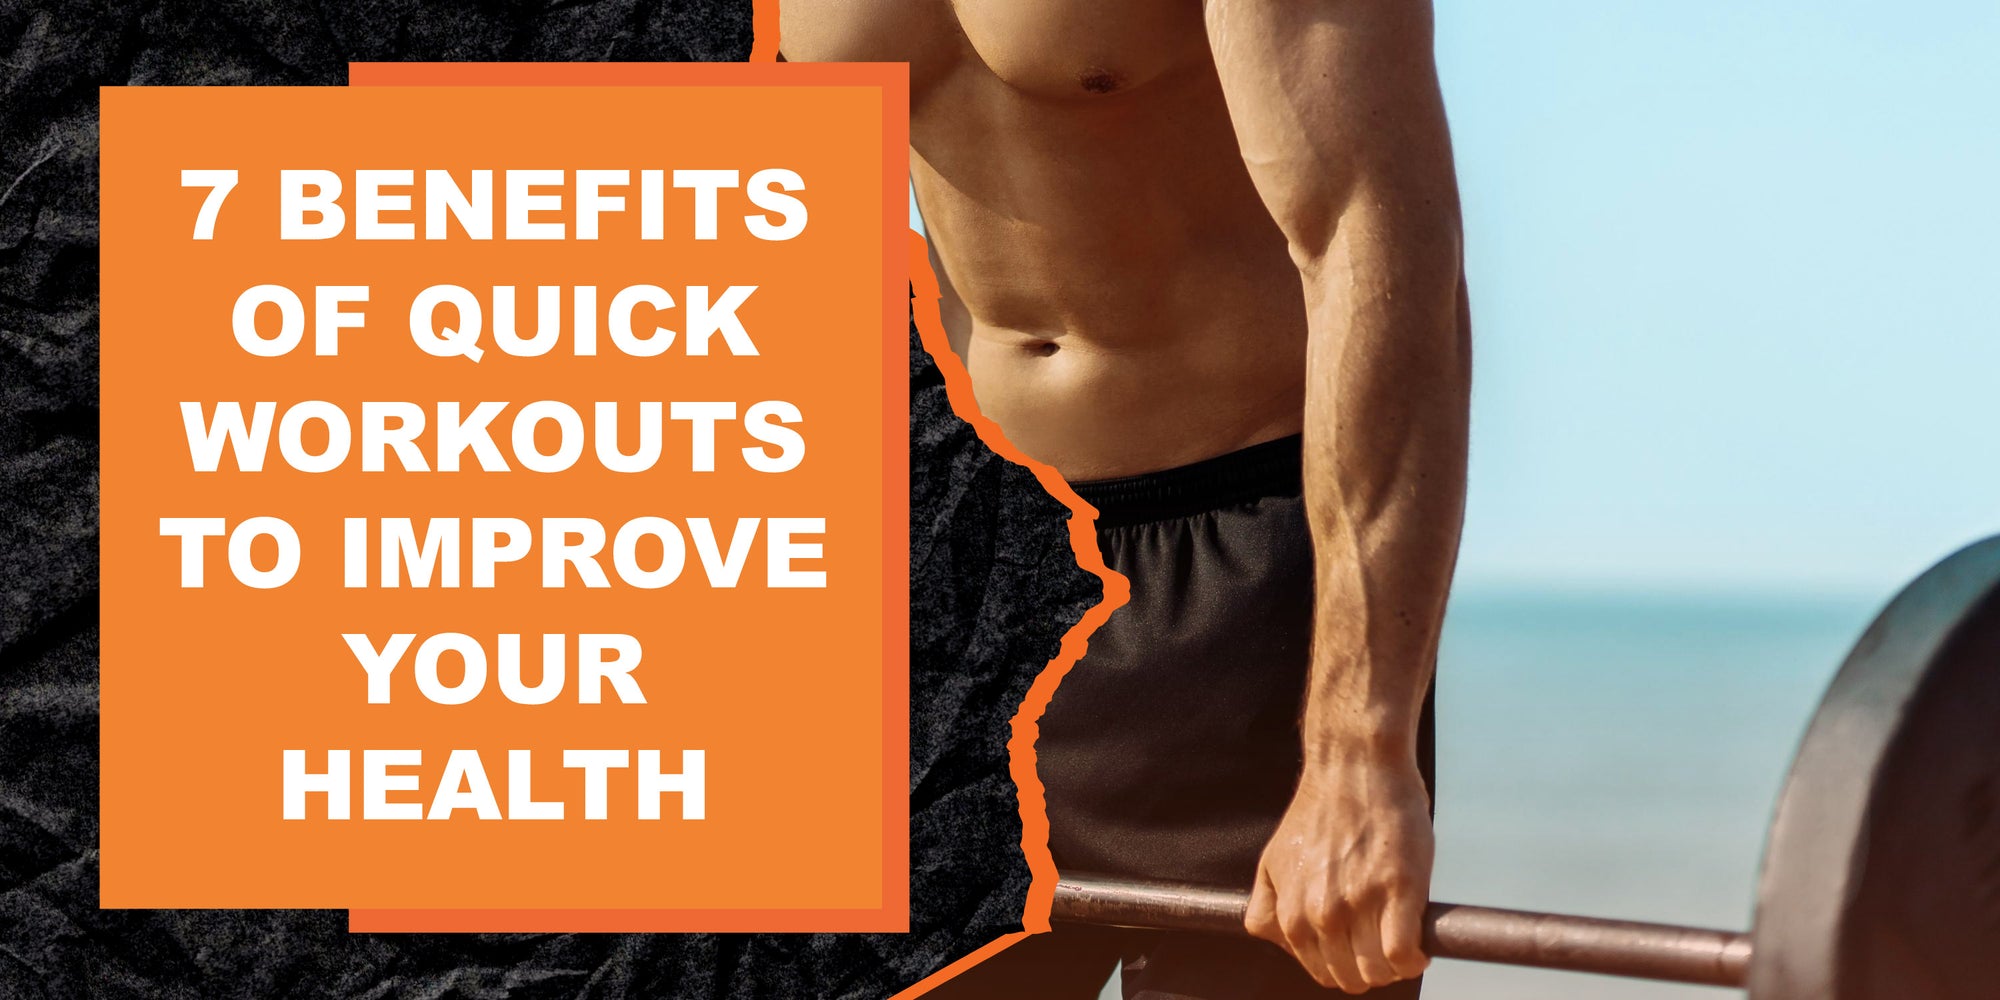 7 Benefits of Quick Workouts to Improve Your Health